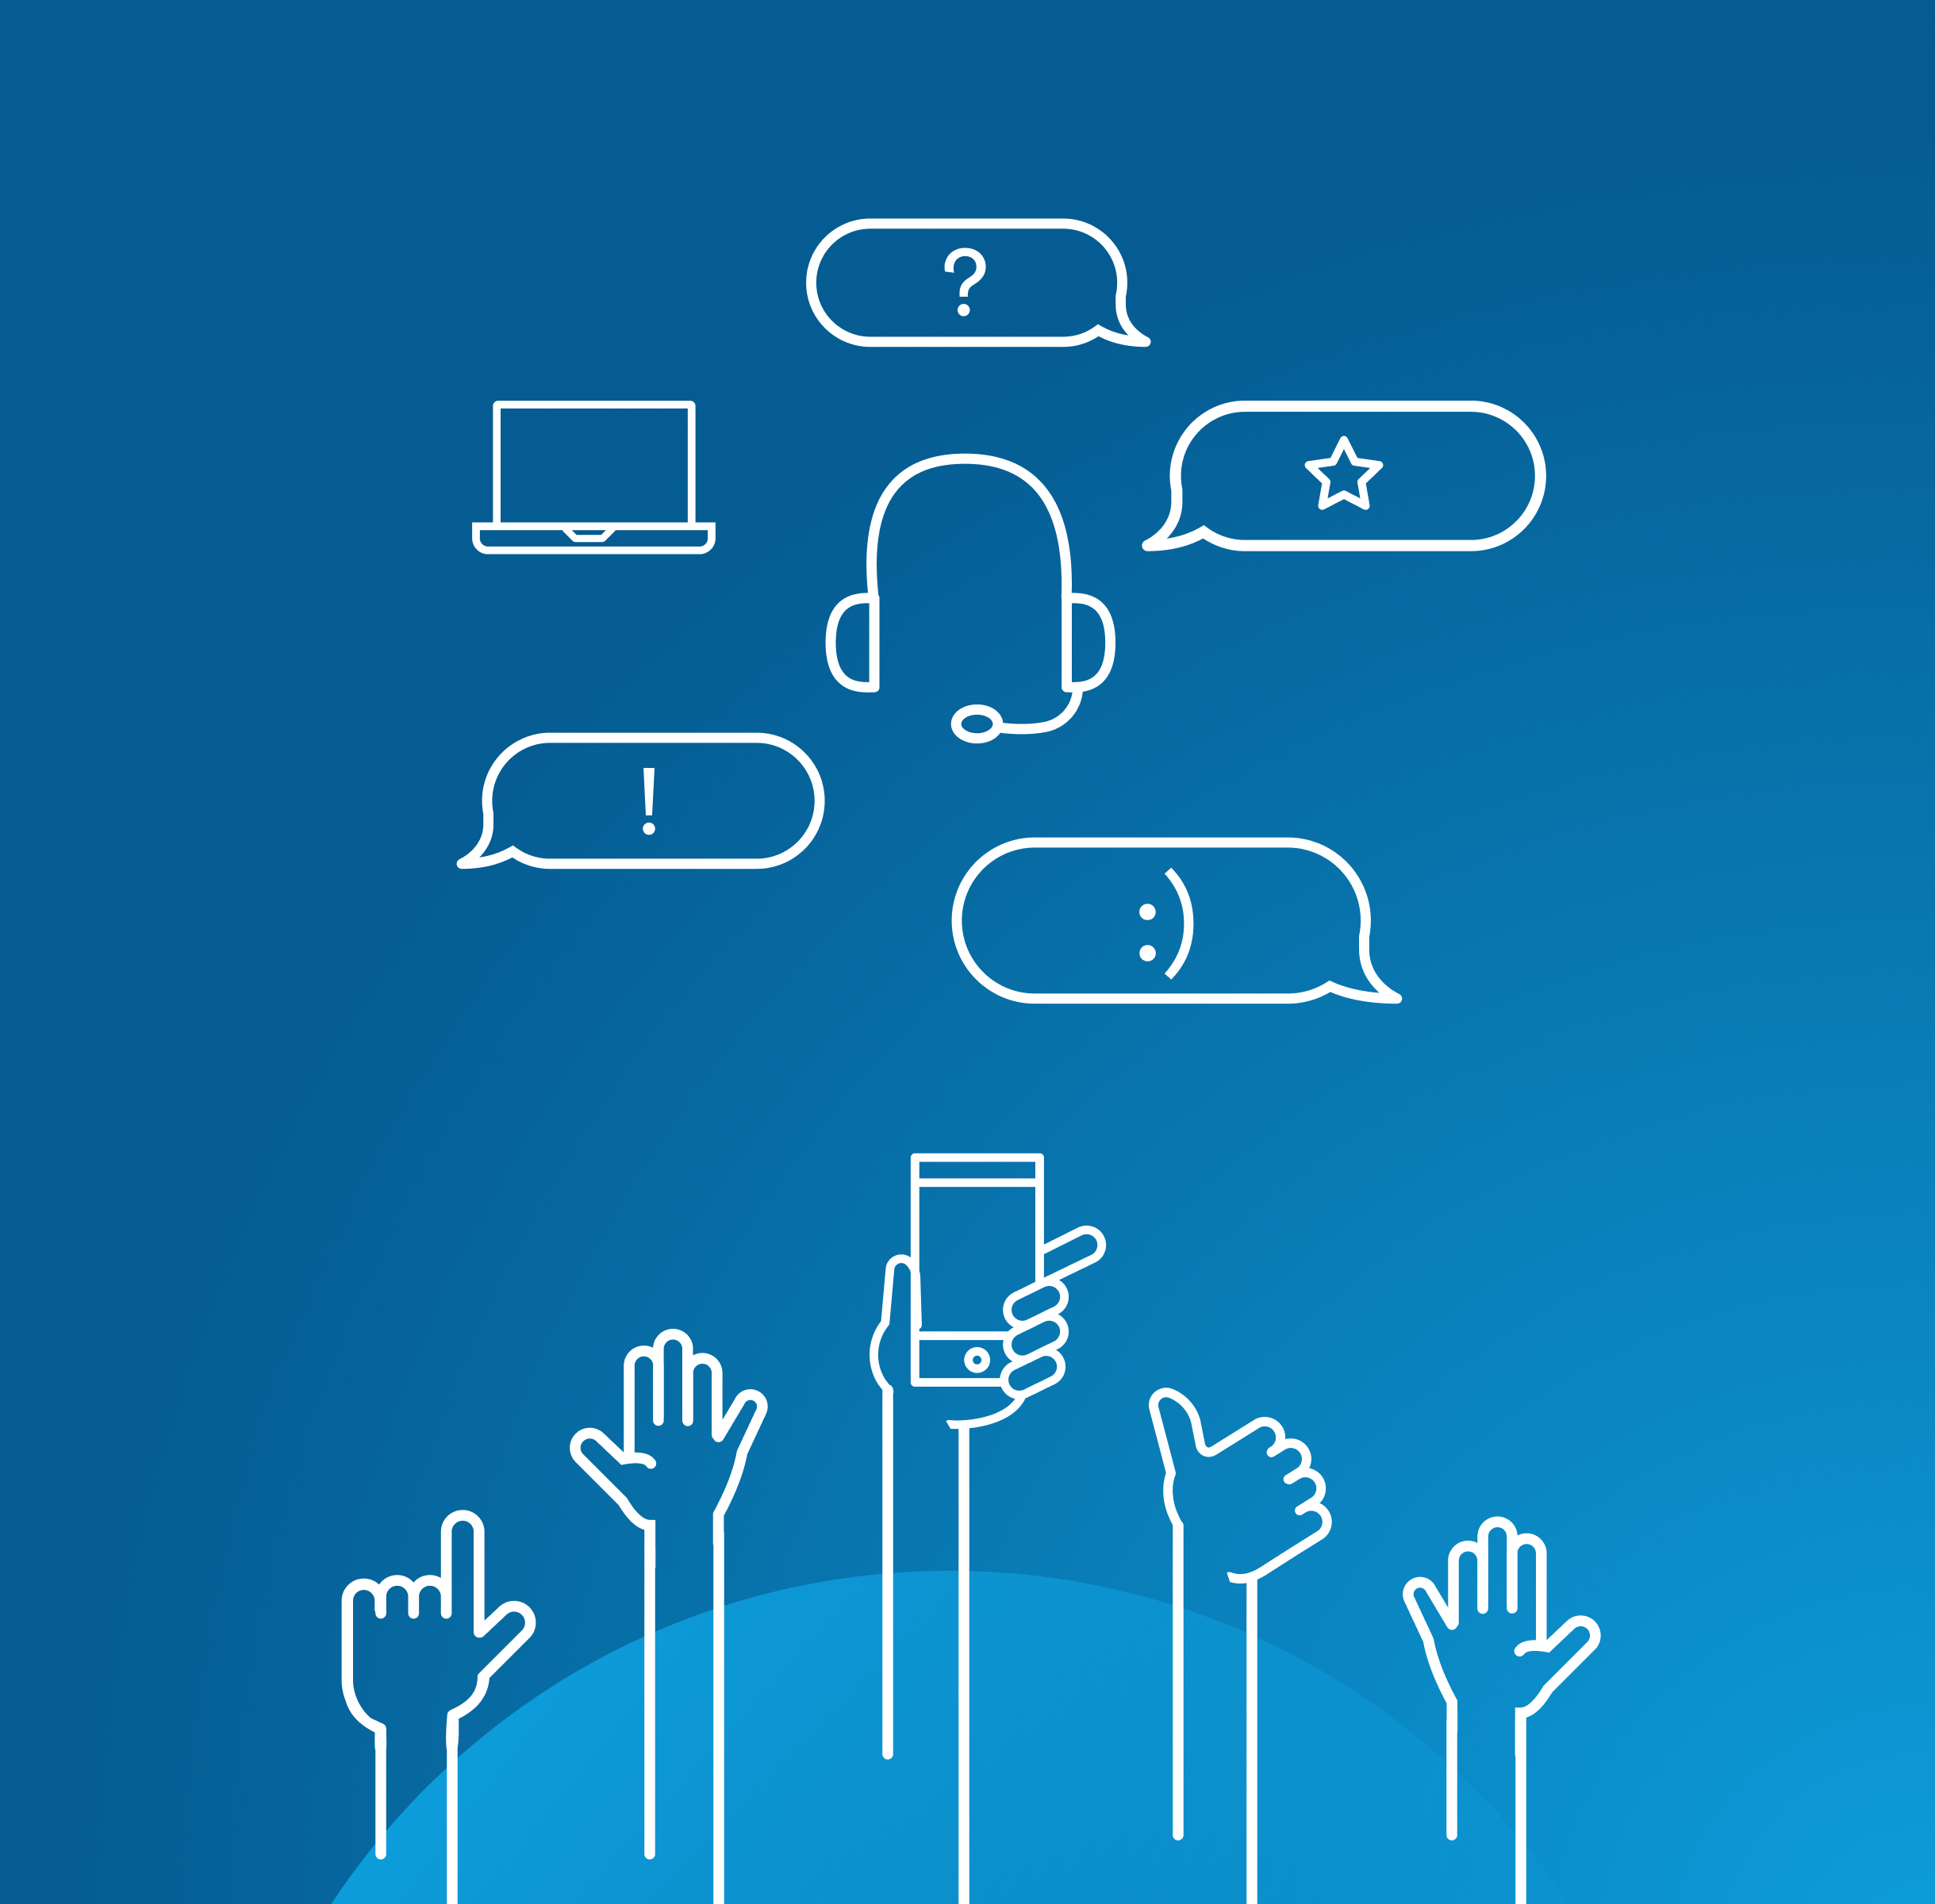 Headset icon surrounded by text message bubbles with different icons in each. Hand icons doing hand gestures, the highest hand holding a mobile phone.